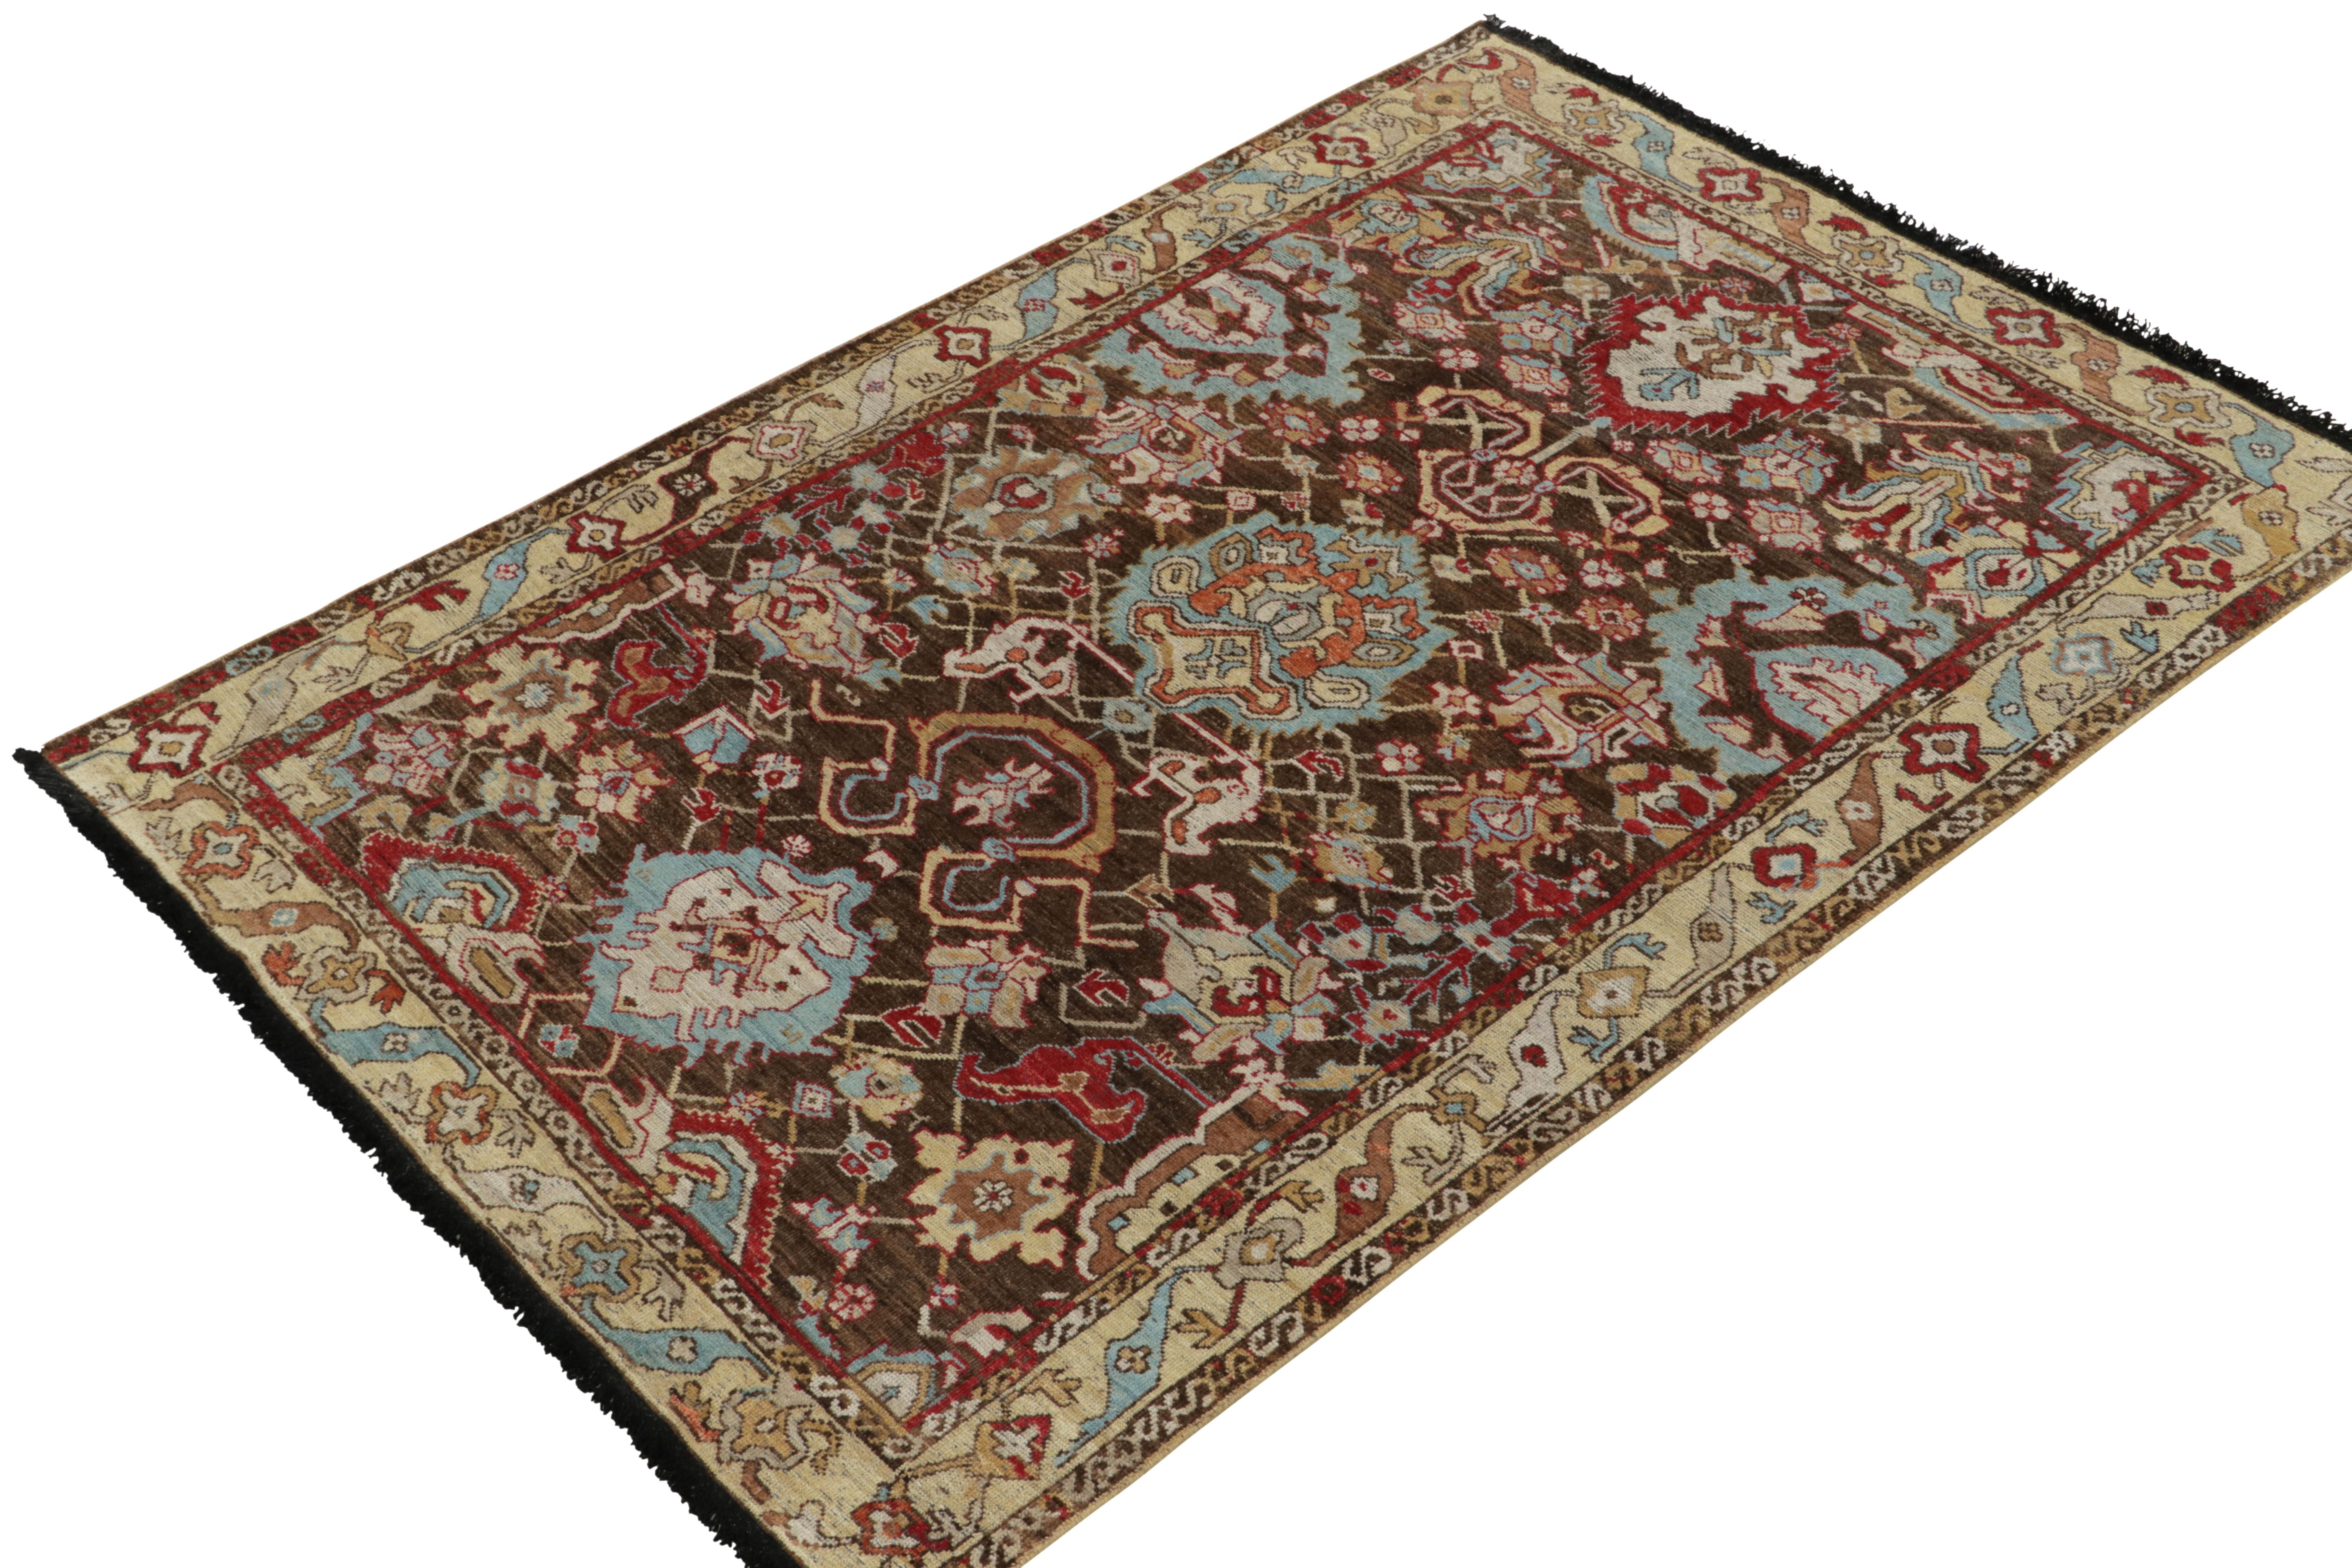 Tribal Rug & Kilim's Caucasian Style Rug in Brown, Blue and Red Floral Pattern For Sale